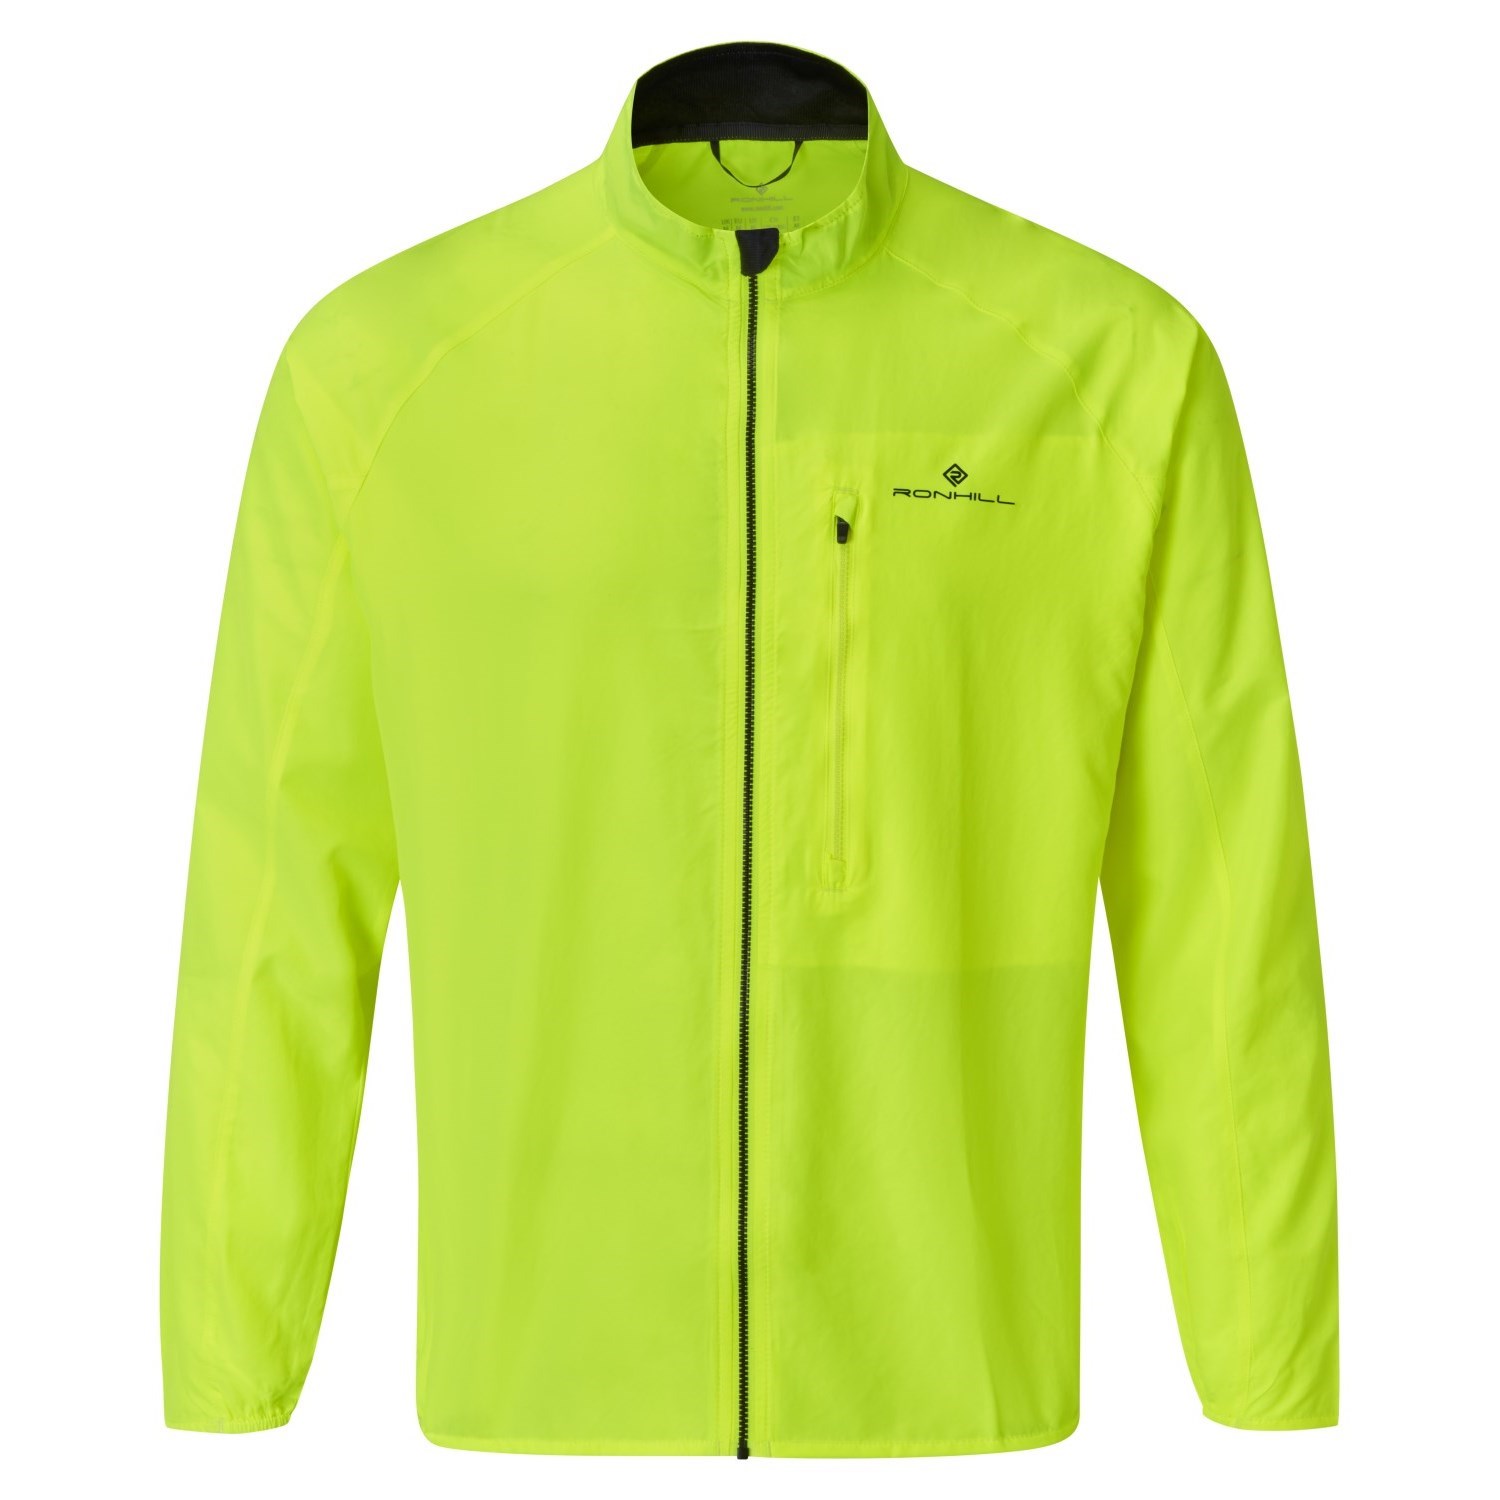 Ronhill Core Mens Running Jacket - Fluo Yellow/Black | Sportitude